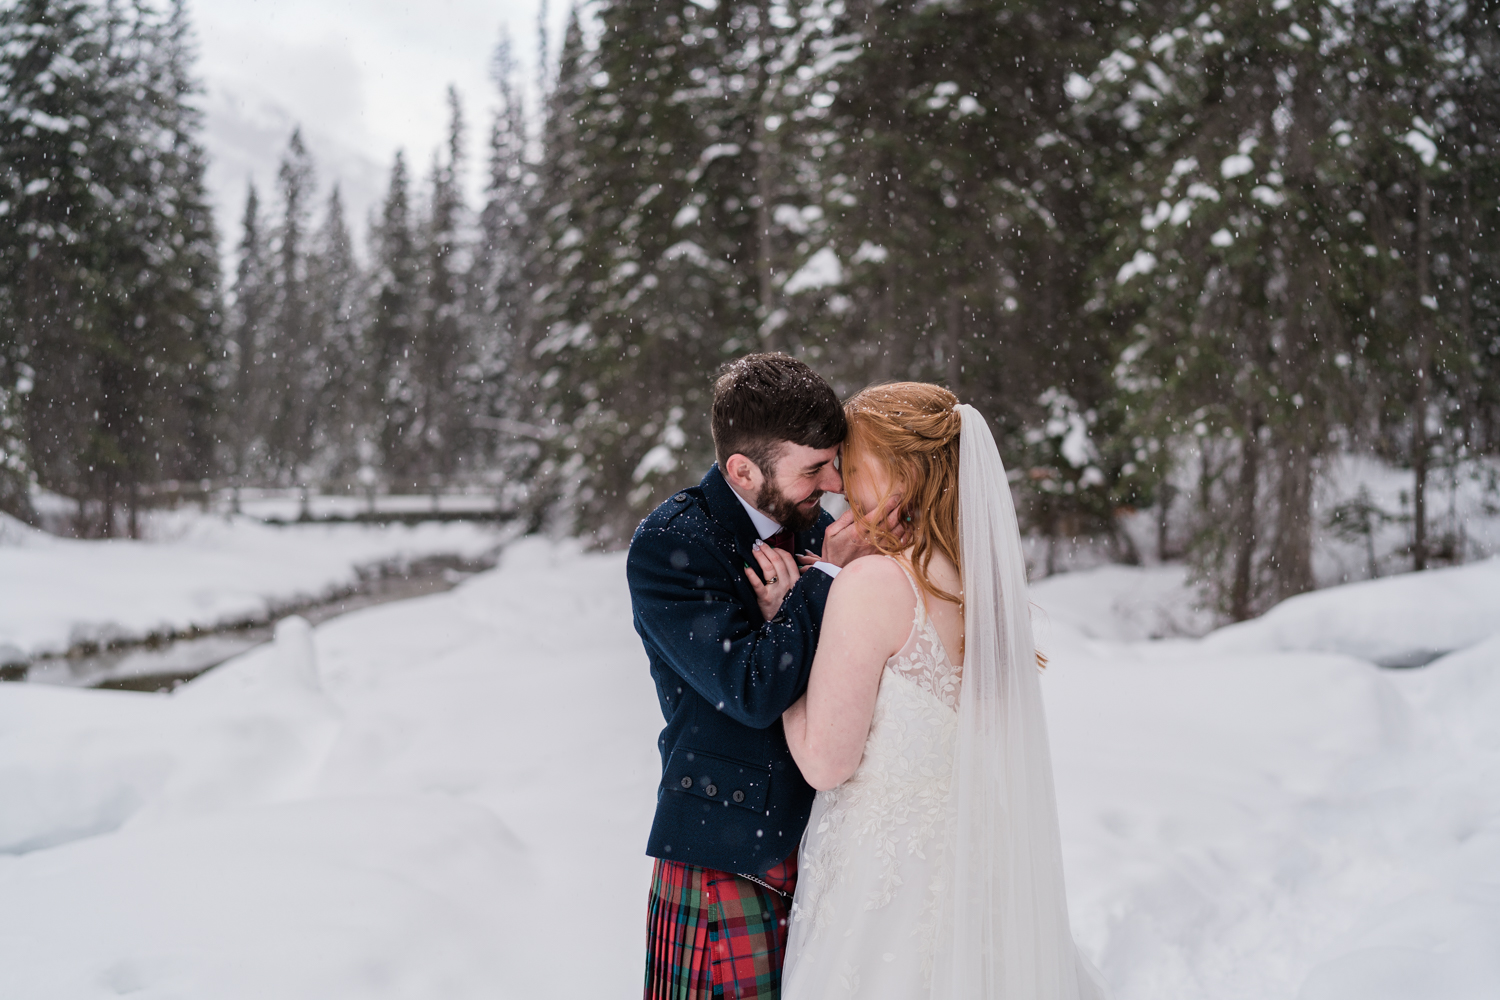 A bride and groom snuggle up with the snow falling down in the forest during an Emerald Lake elopement